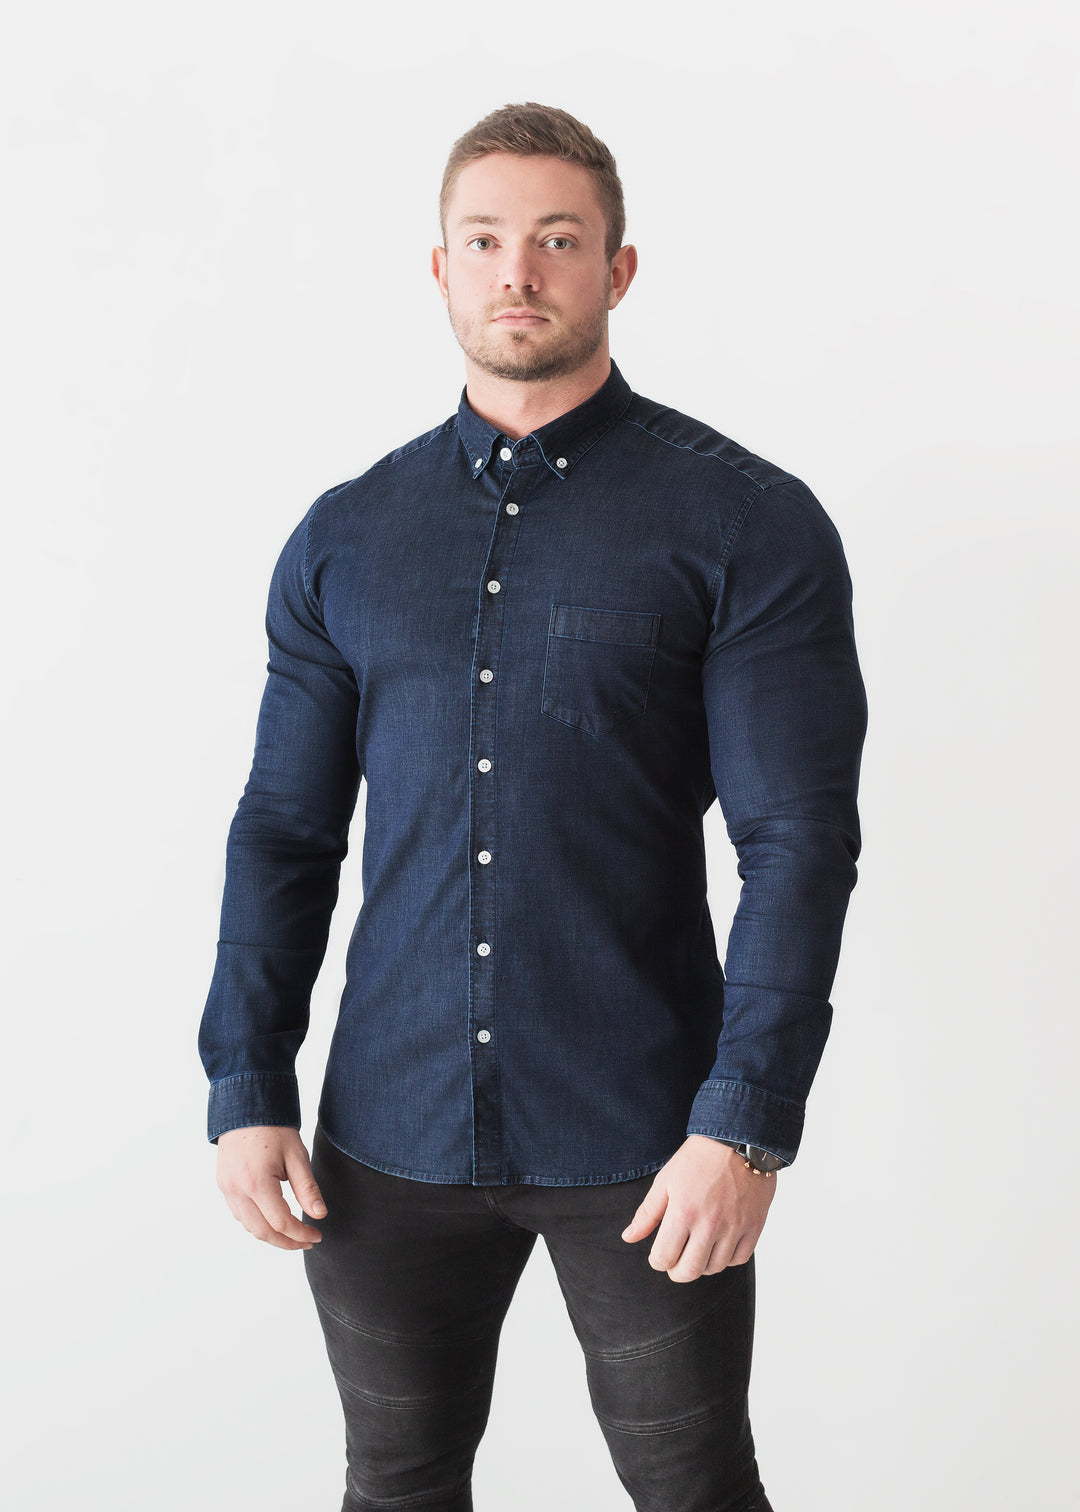 Navy Blue Denim Tapered Fit Shirt. A Proportionally Fitted and Jean Muscle Fit Shirt. The Best Shirts For a Muscular Build.